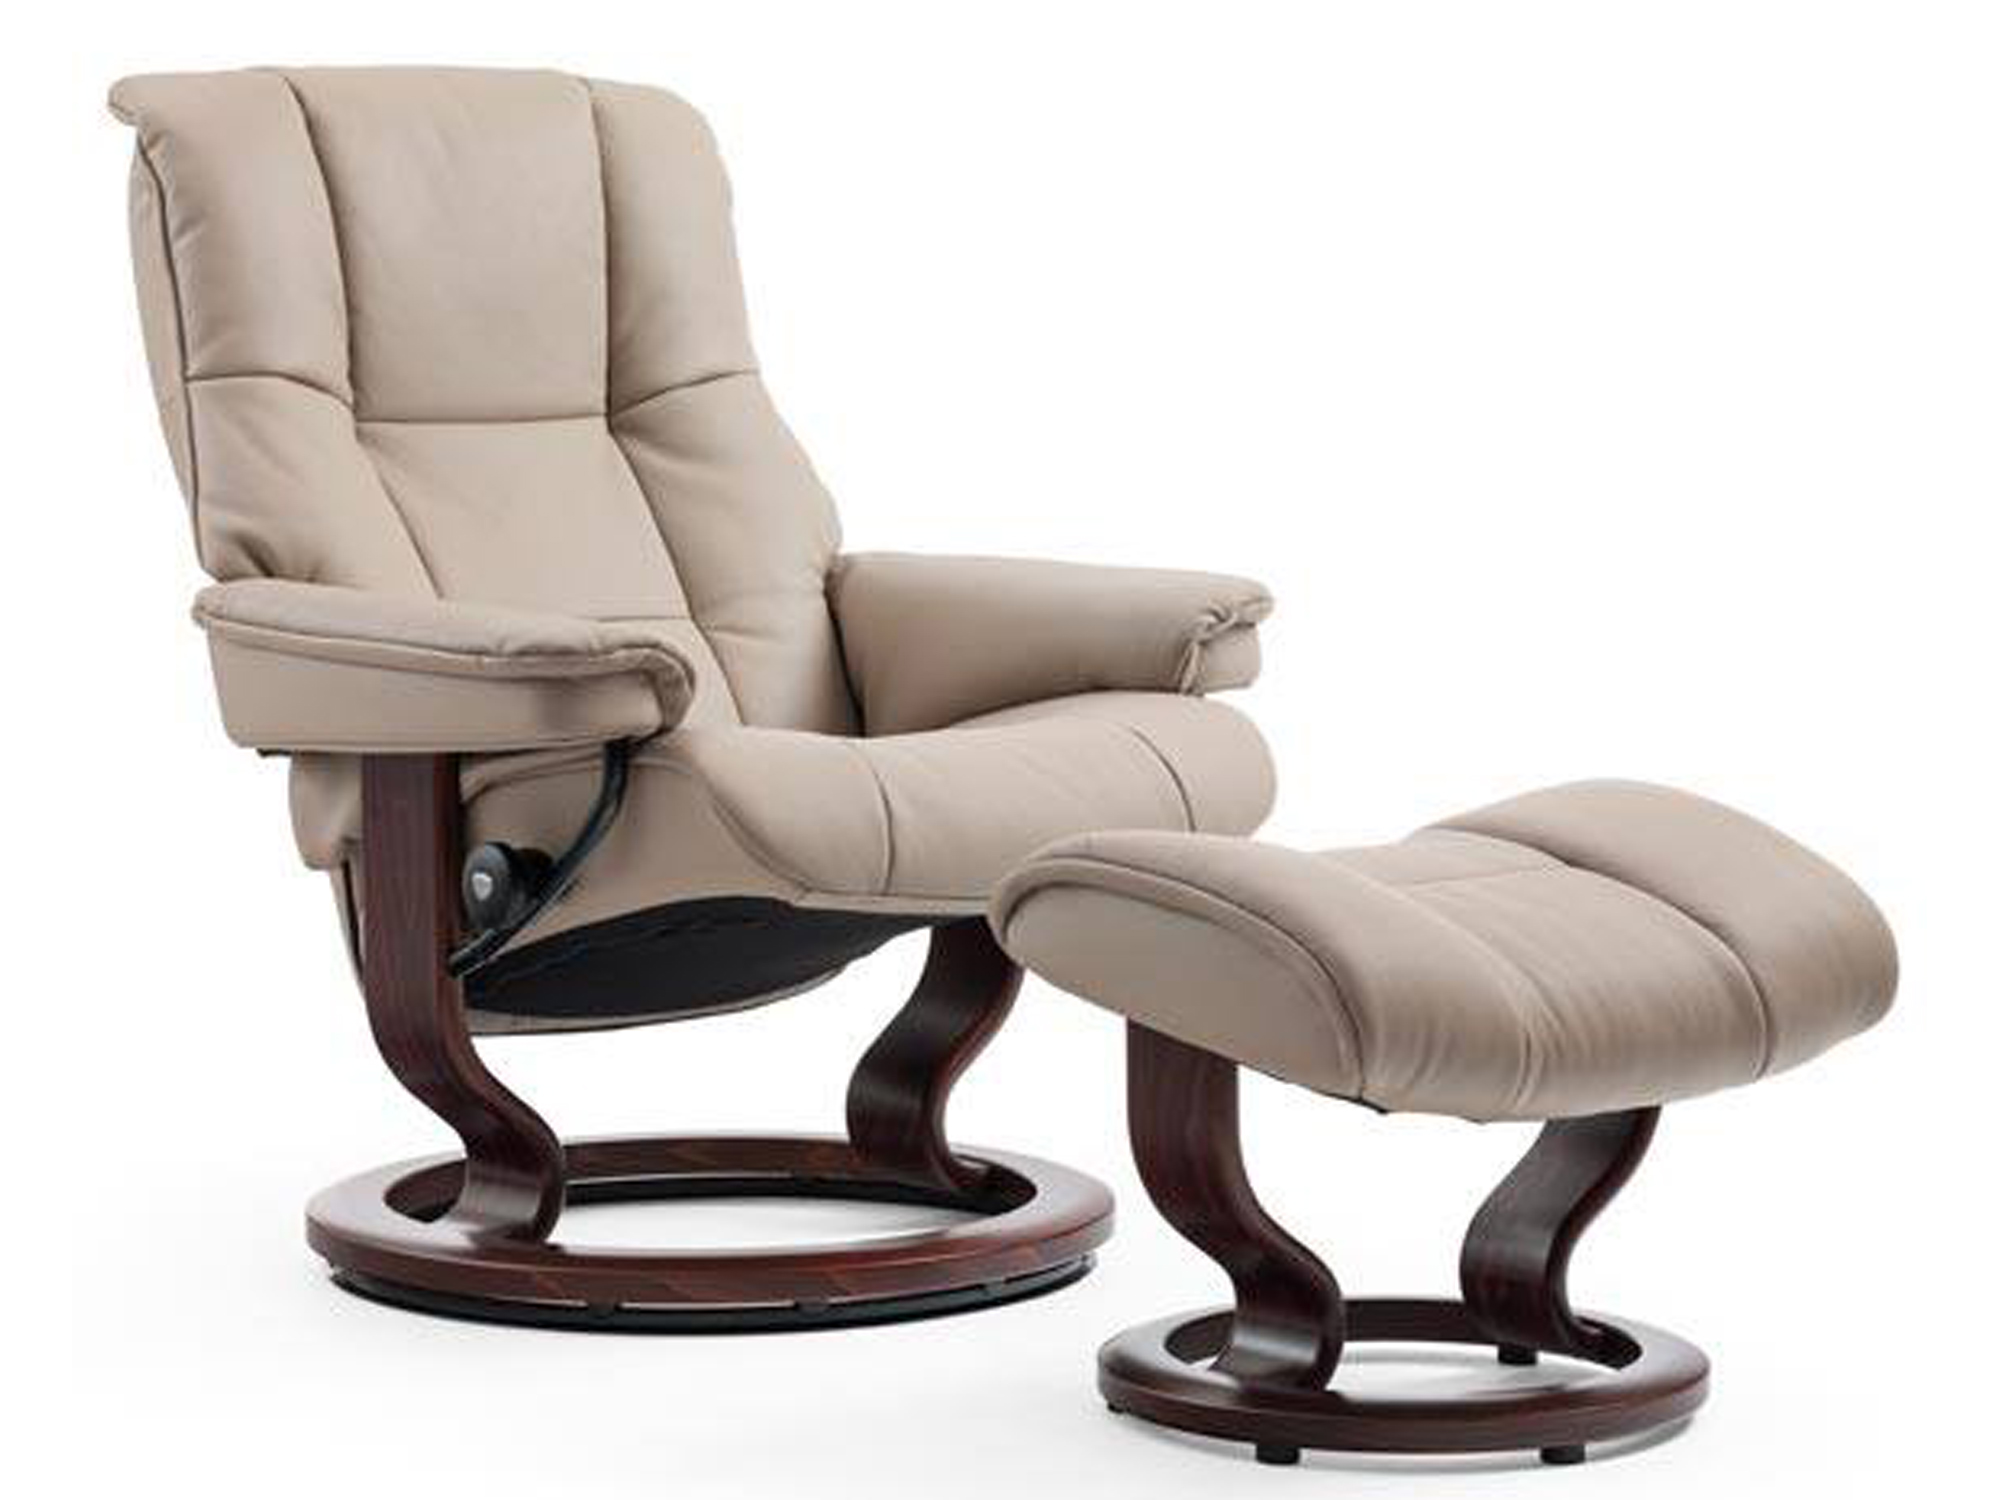 Stressless Mayfair with Classic Base